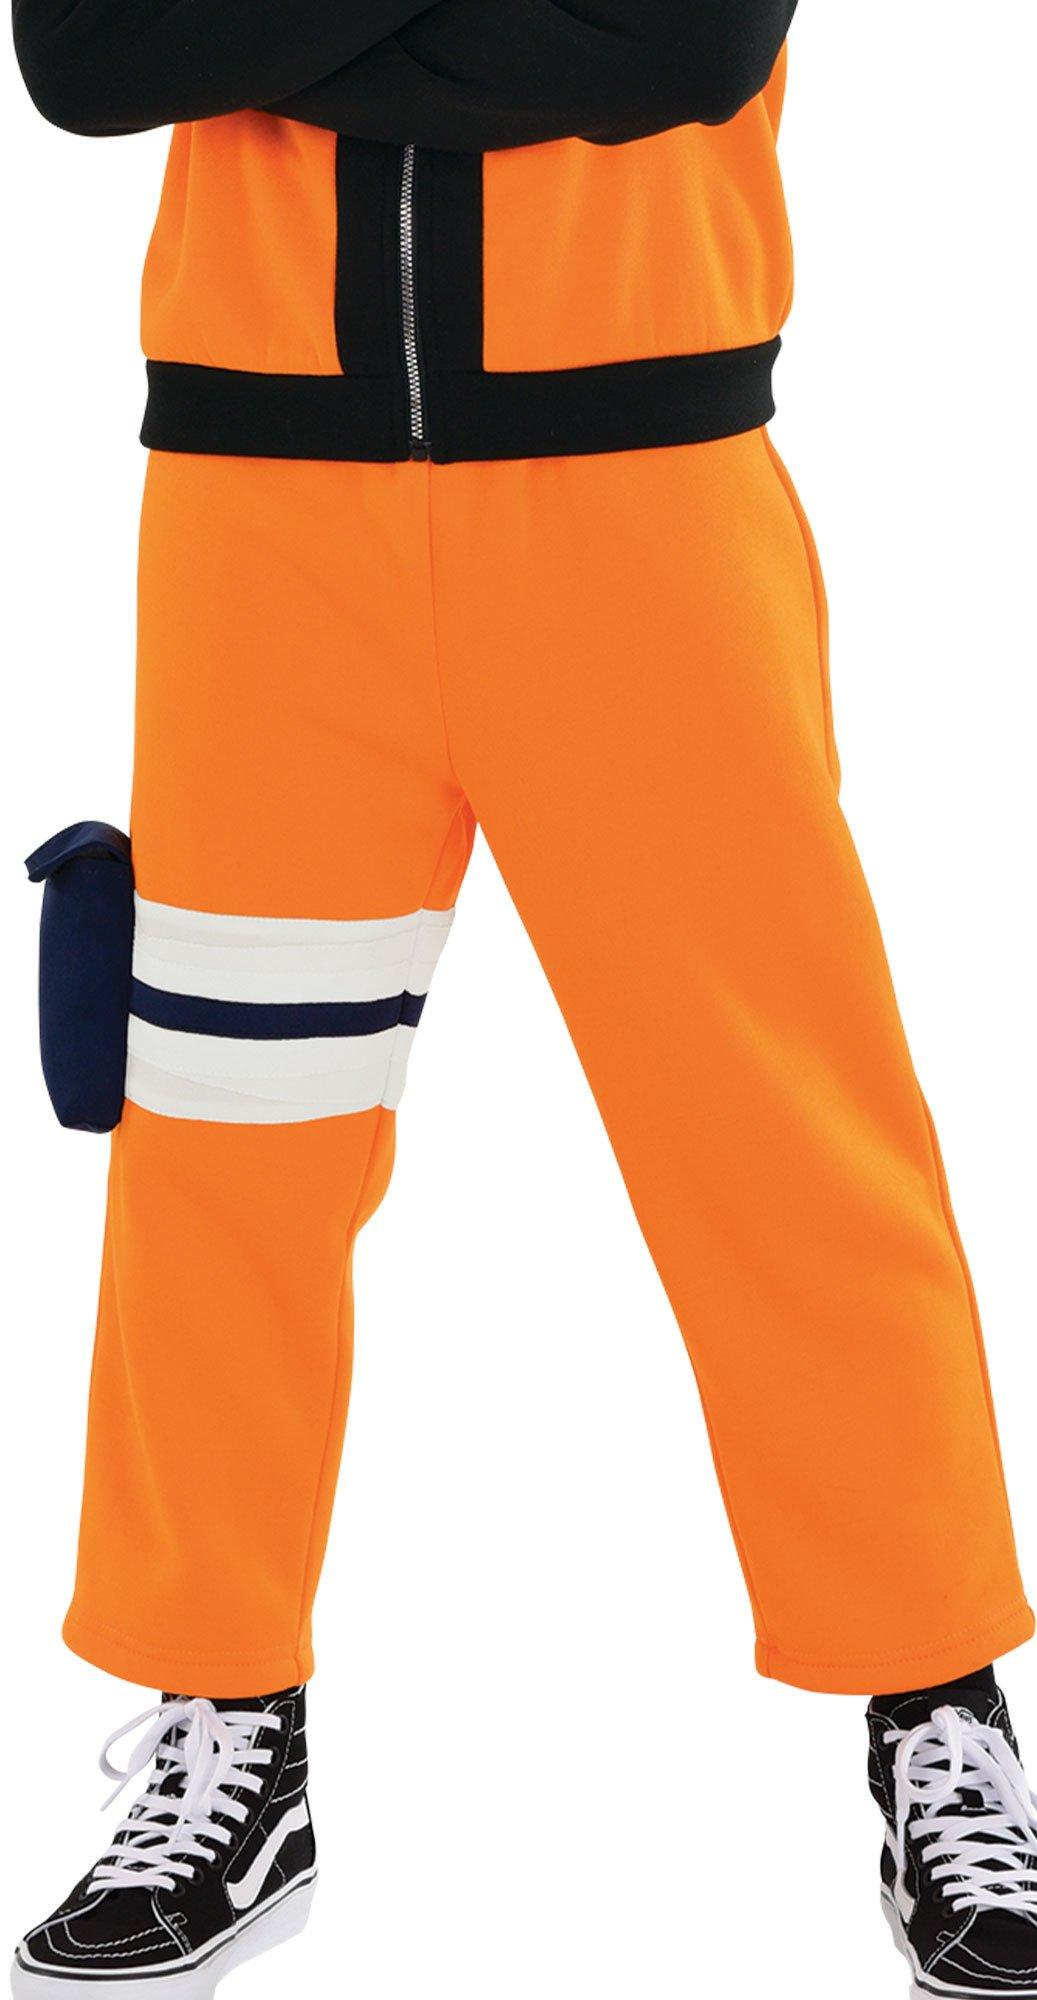 Party City Naruto Costume for Adults, Standard Size, Includes Black and  Orange Zip Jumpsuit, Holster, and Headpiece